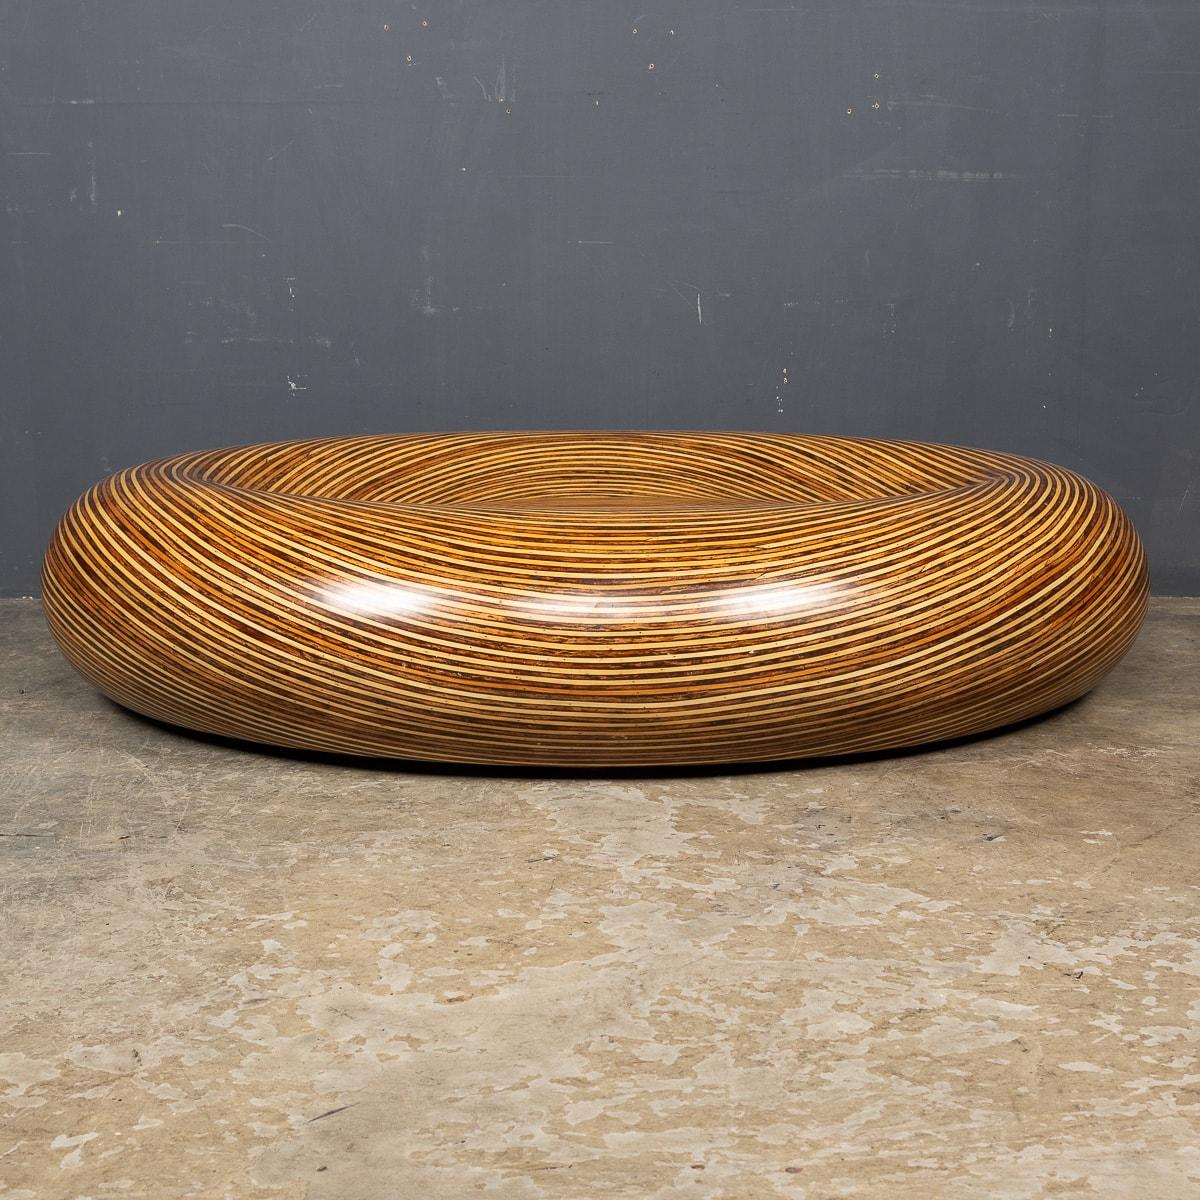 Fiberglass 20th Century Large Moulded Fibreglass Table With Layered Wood Effect c.1970 For Sale